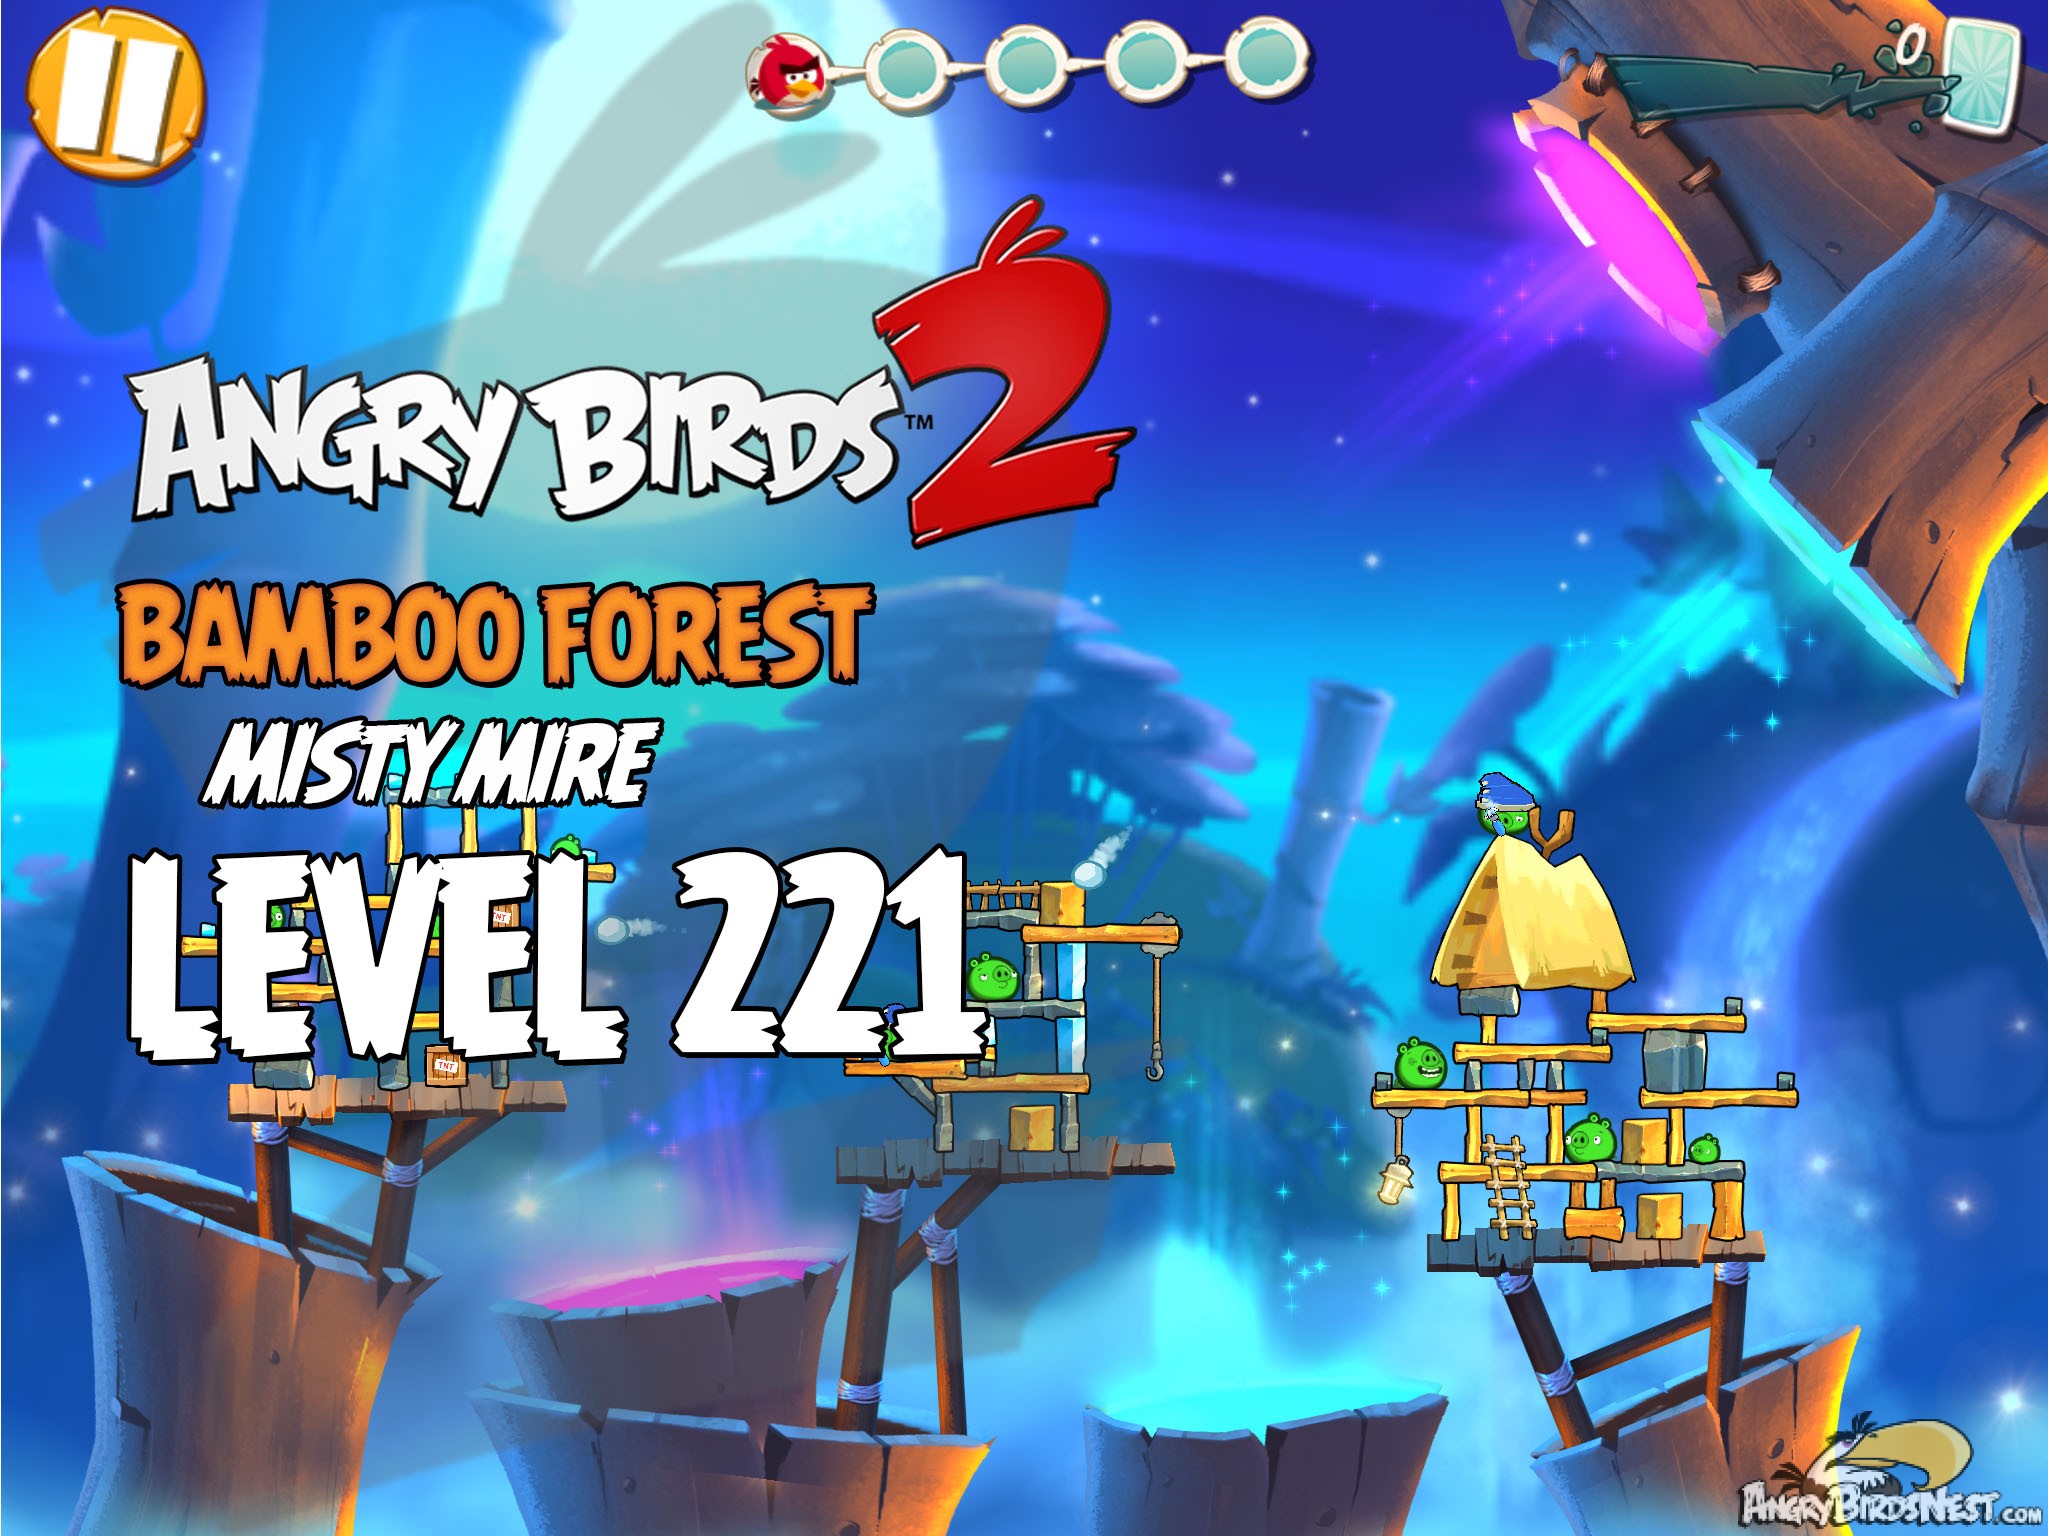 Angry Birds 2 Bamboo Forest Misty Mire Level 221